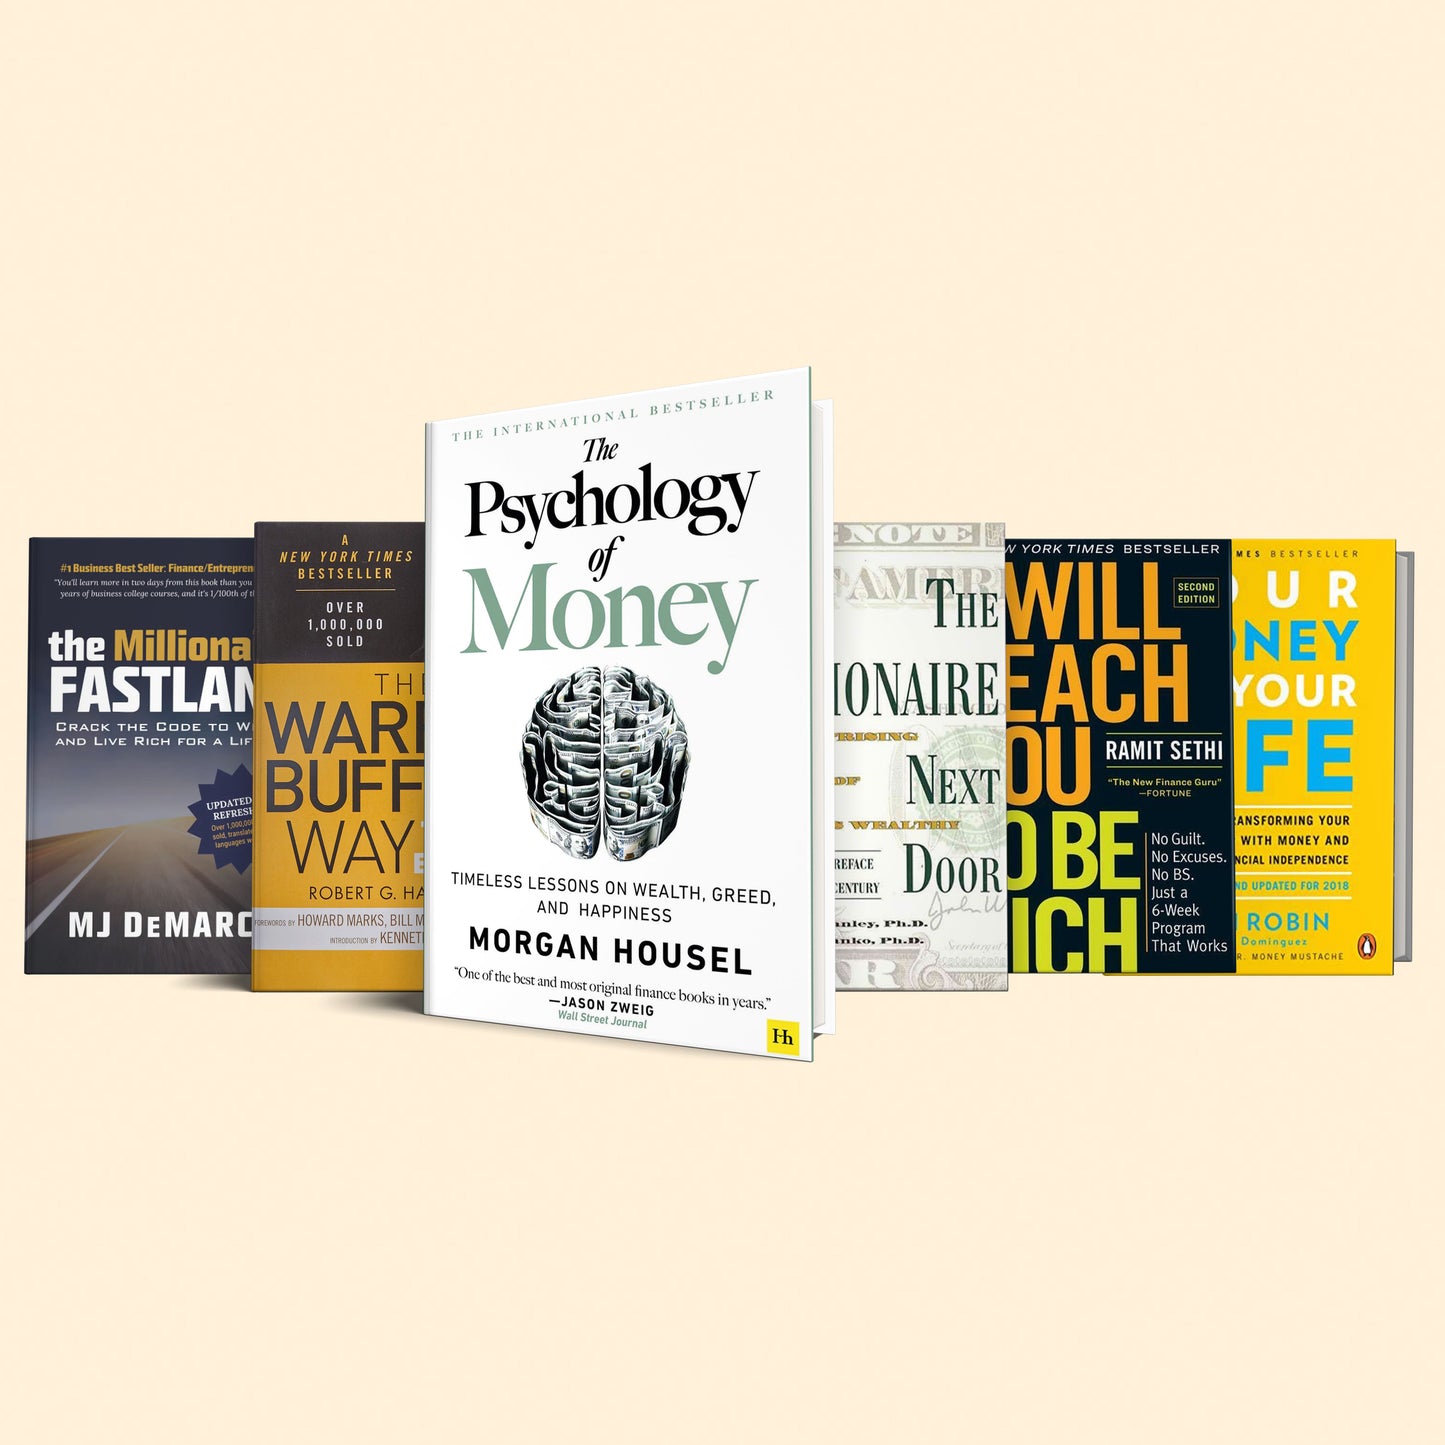 6 Books to solve 6 money problems (Psychology of money, The warren buffett way, The Millionaire Next Door, I Will Teach You To Be Rich, Your money or your life, The Millionaire Fastlane)